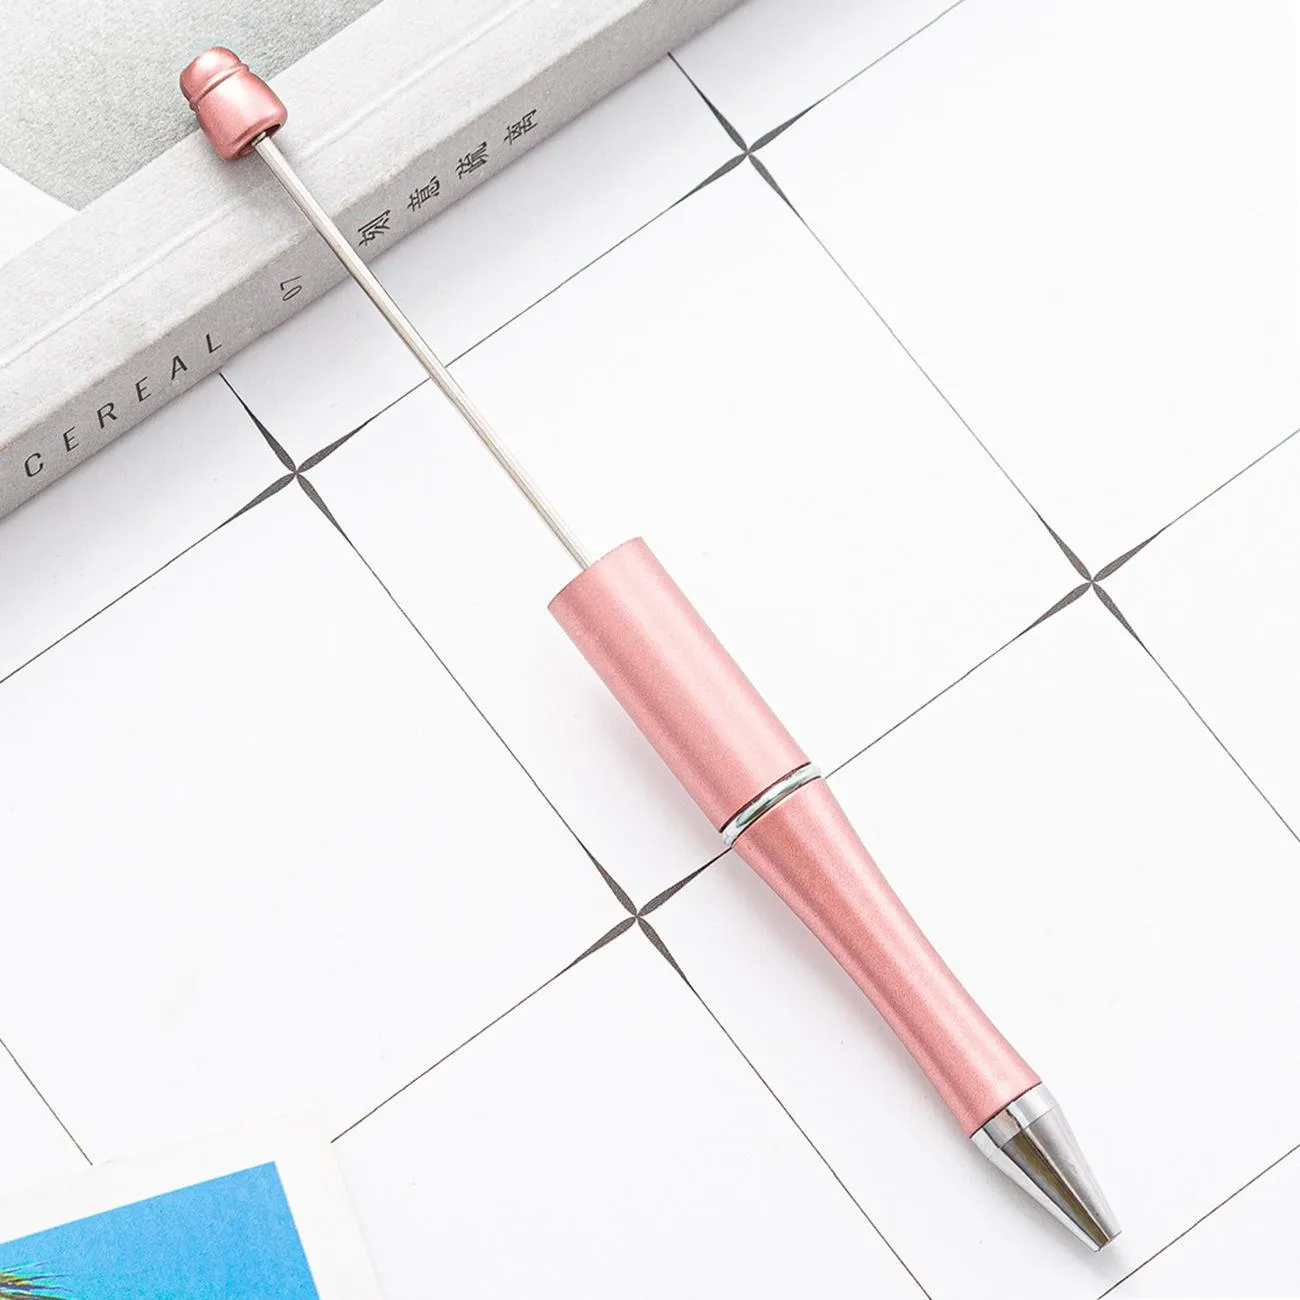 Beaded Pen Creative DIY PLastic Ballpoint Pens Office Business Advertising Points Purchase Gift Stationery School Student Writing Test Supplies